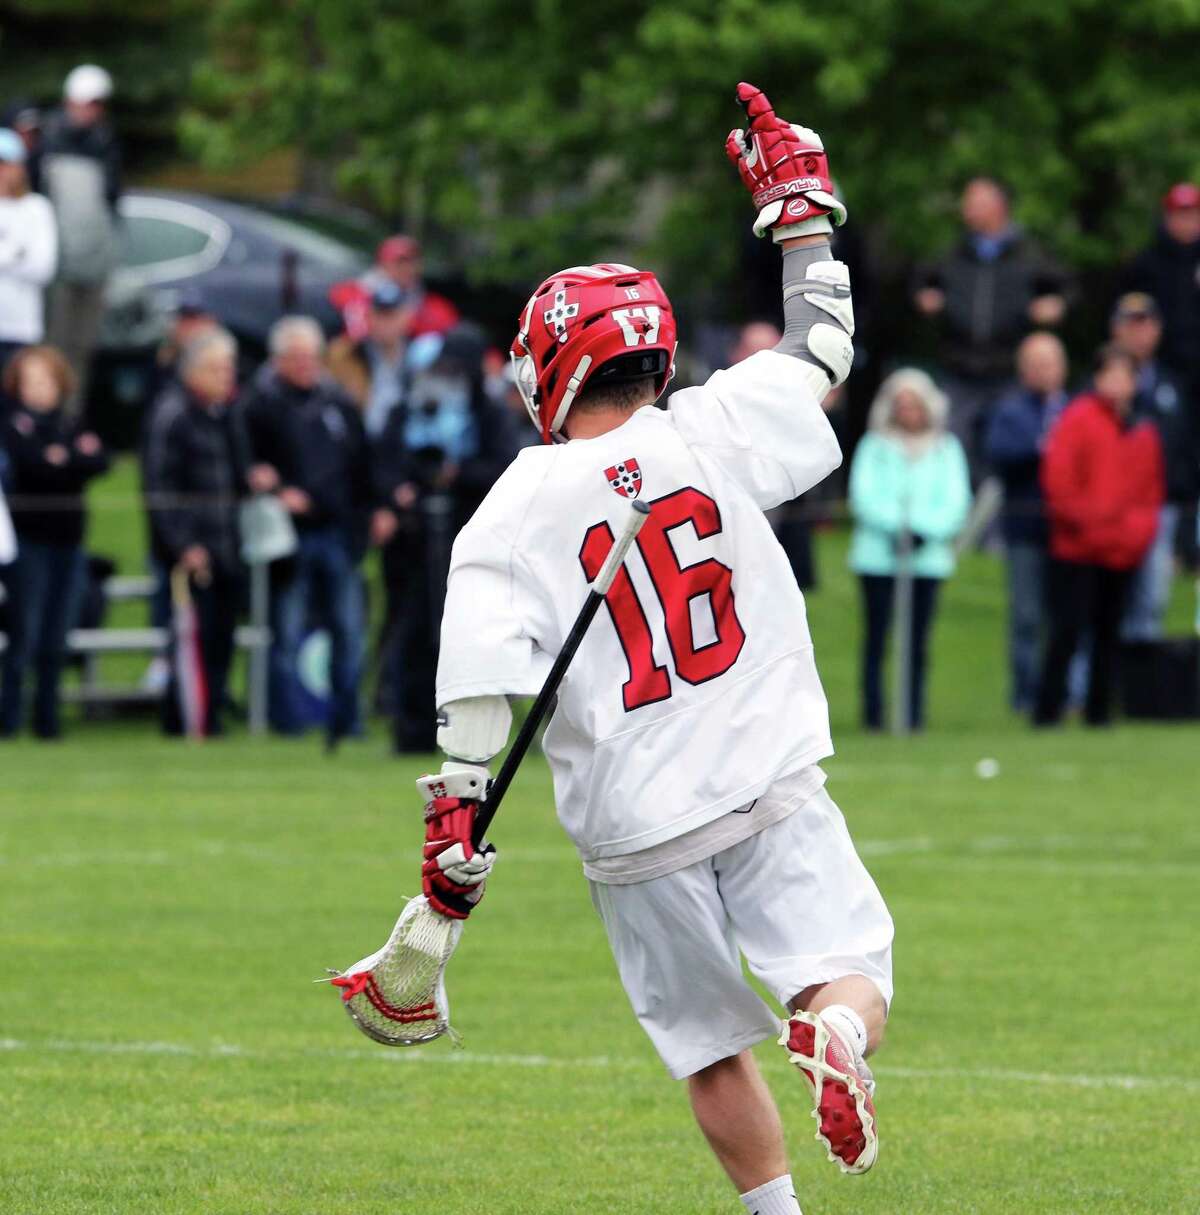 Harry Stanton, an NCHS class of '14 grad is a star for the Wesleyan lacrosse program.